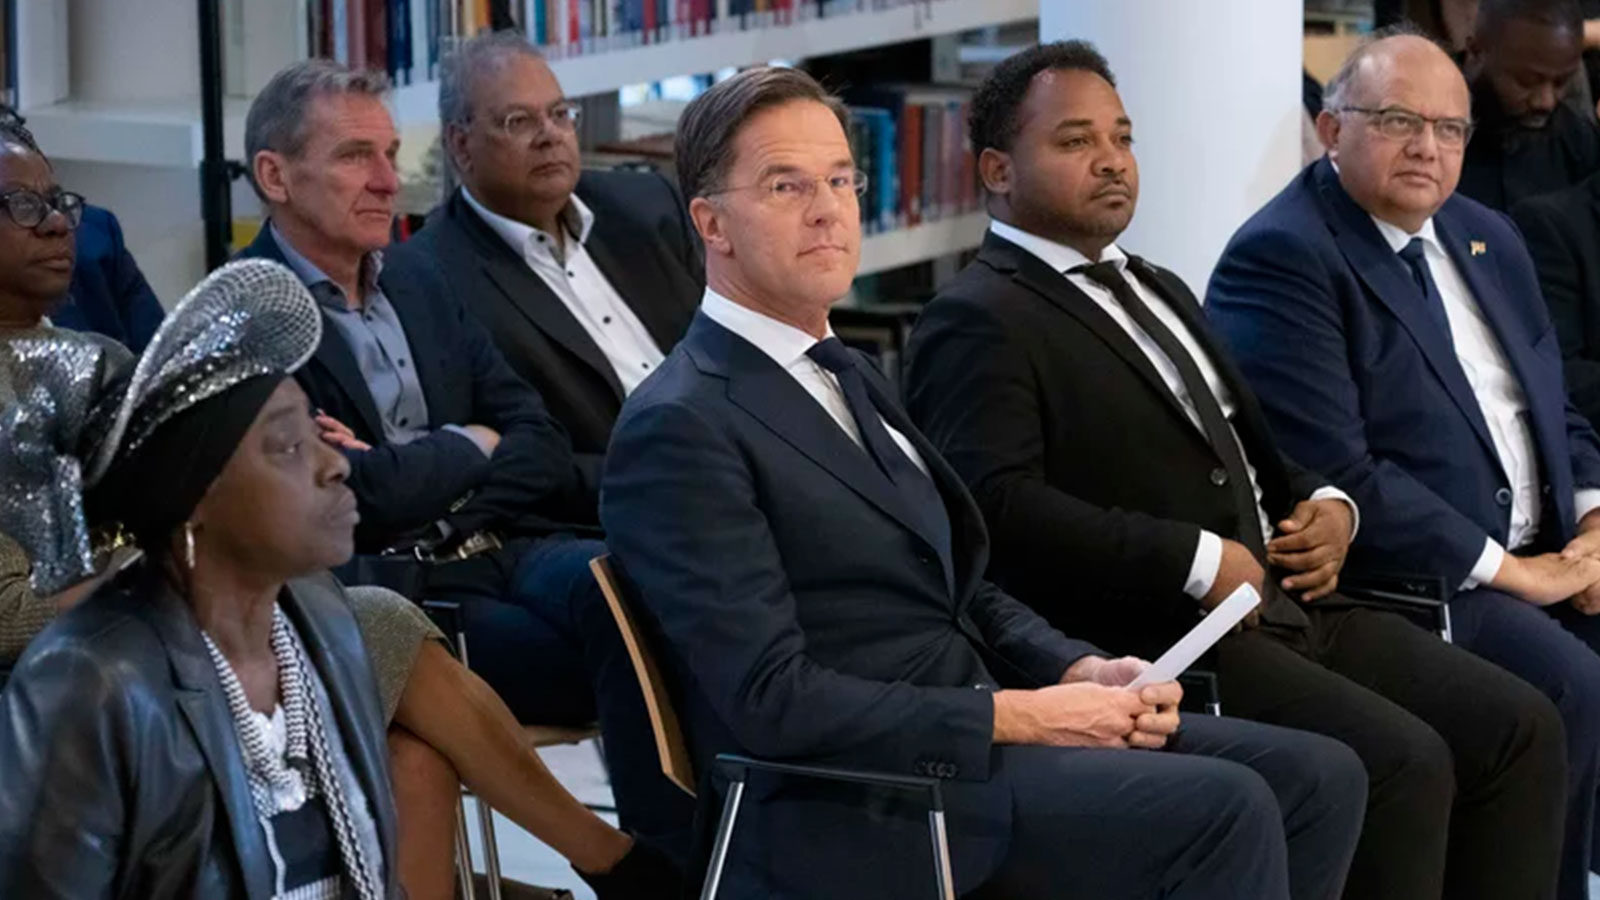 Dutch Prime Minister Mark Rutte, center, apologized on behalf of his government for the Netherlands' historical role in slavery and the slave trade. 